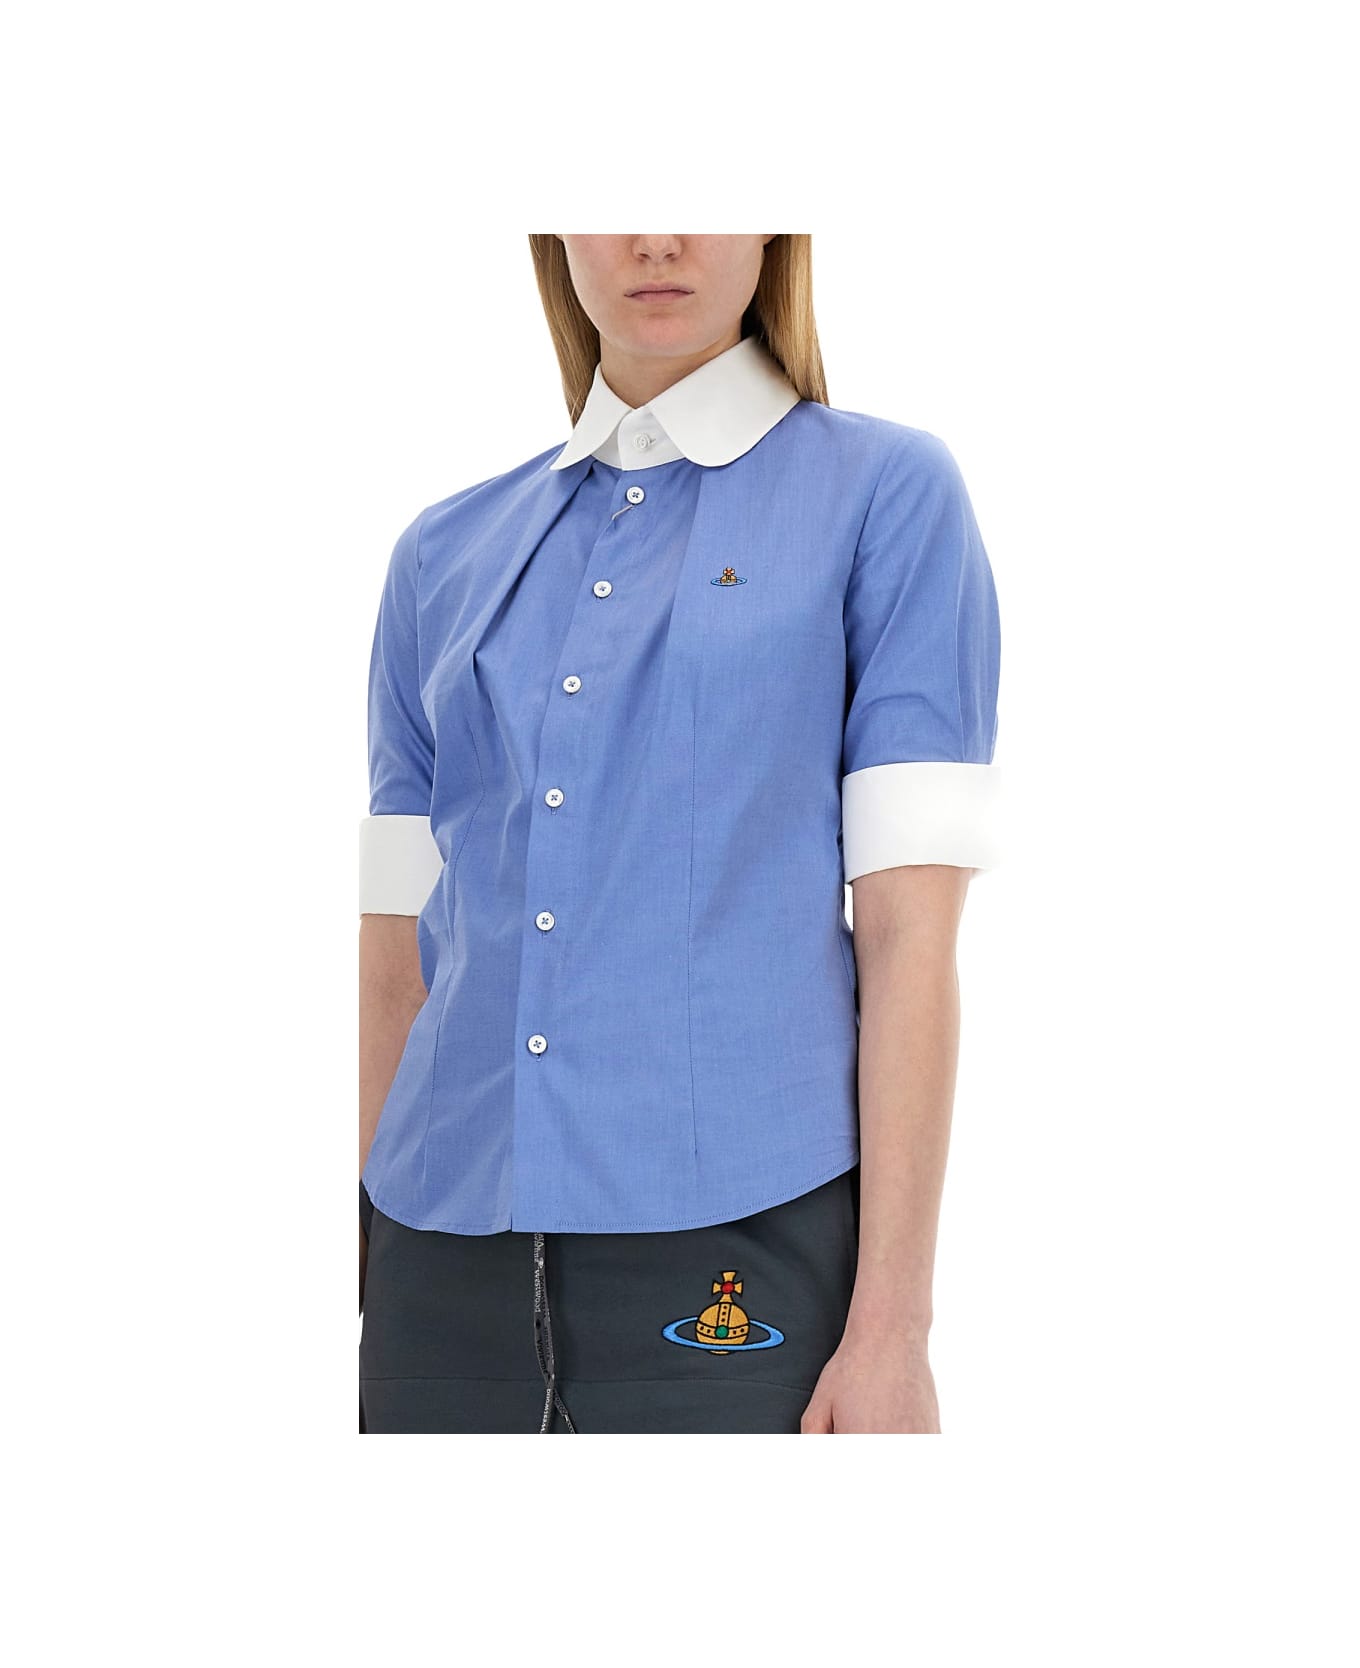 Vivienne Westwood Shirt With Orb Embroidery - AZURE